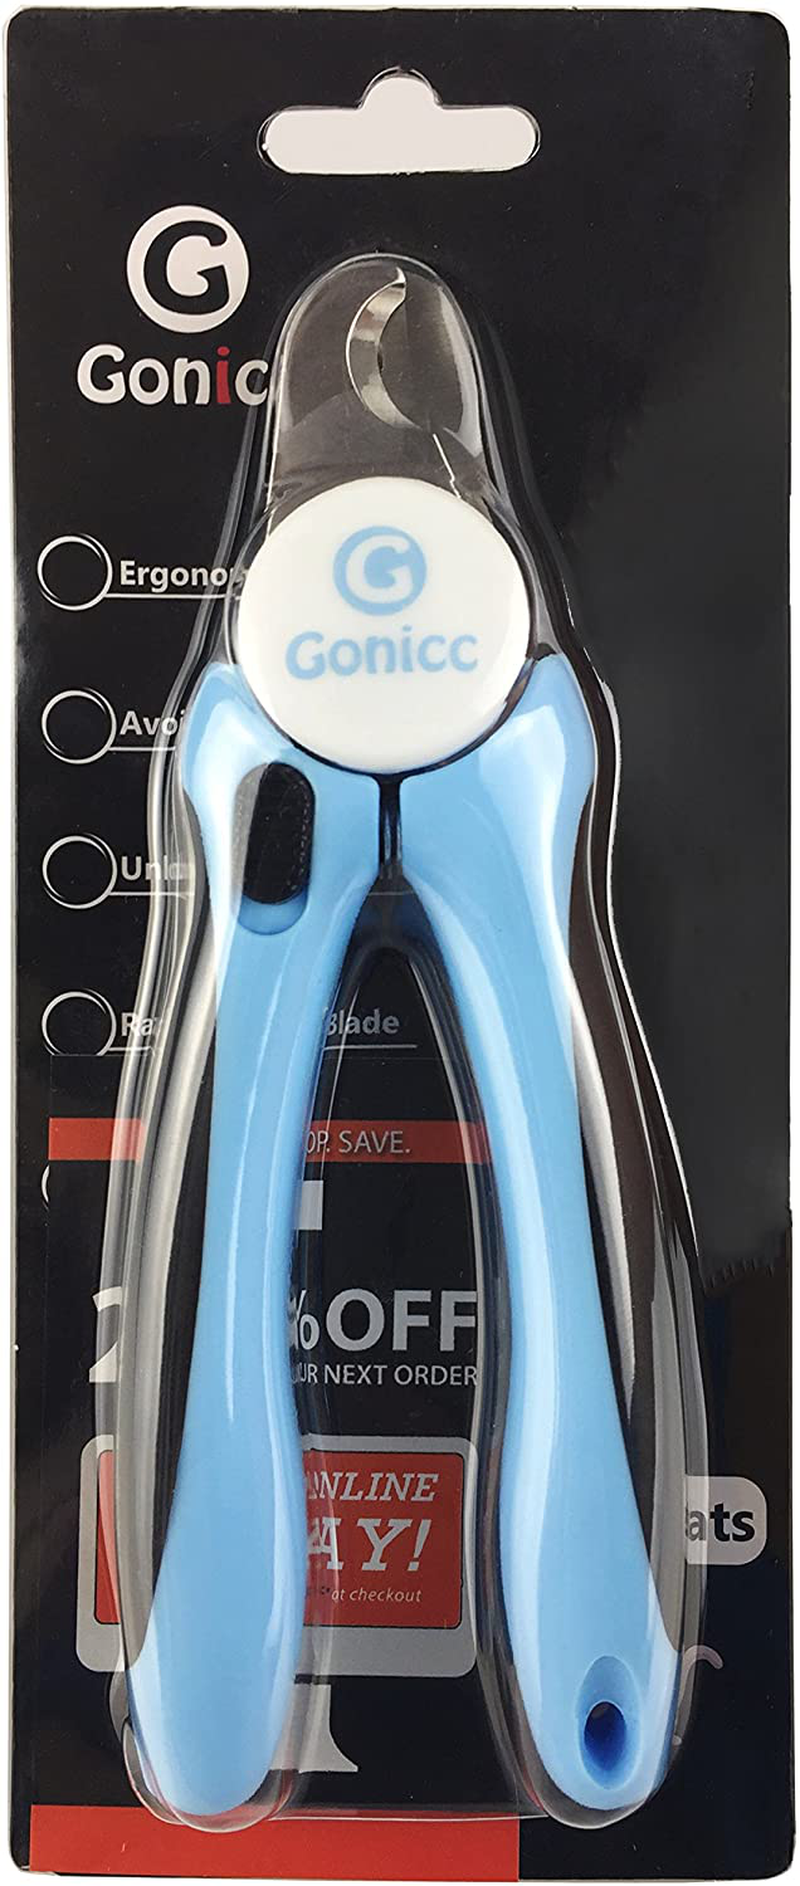 Gonicc | Dog | Nail Clippers Trimmers Pets Cats Dogs Safe New | Poshmark